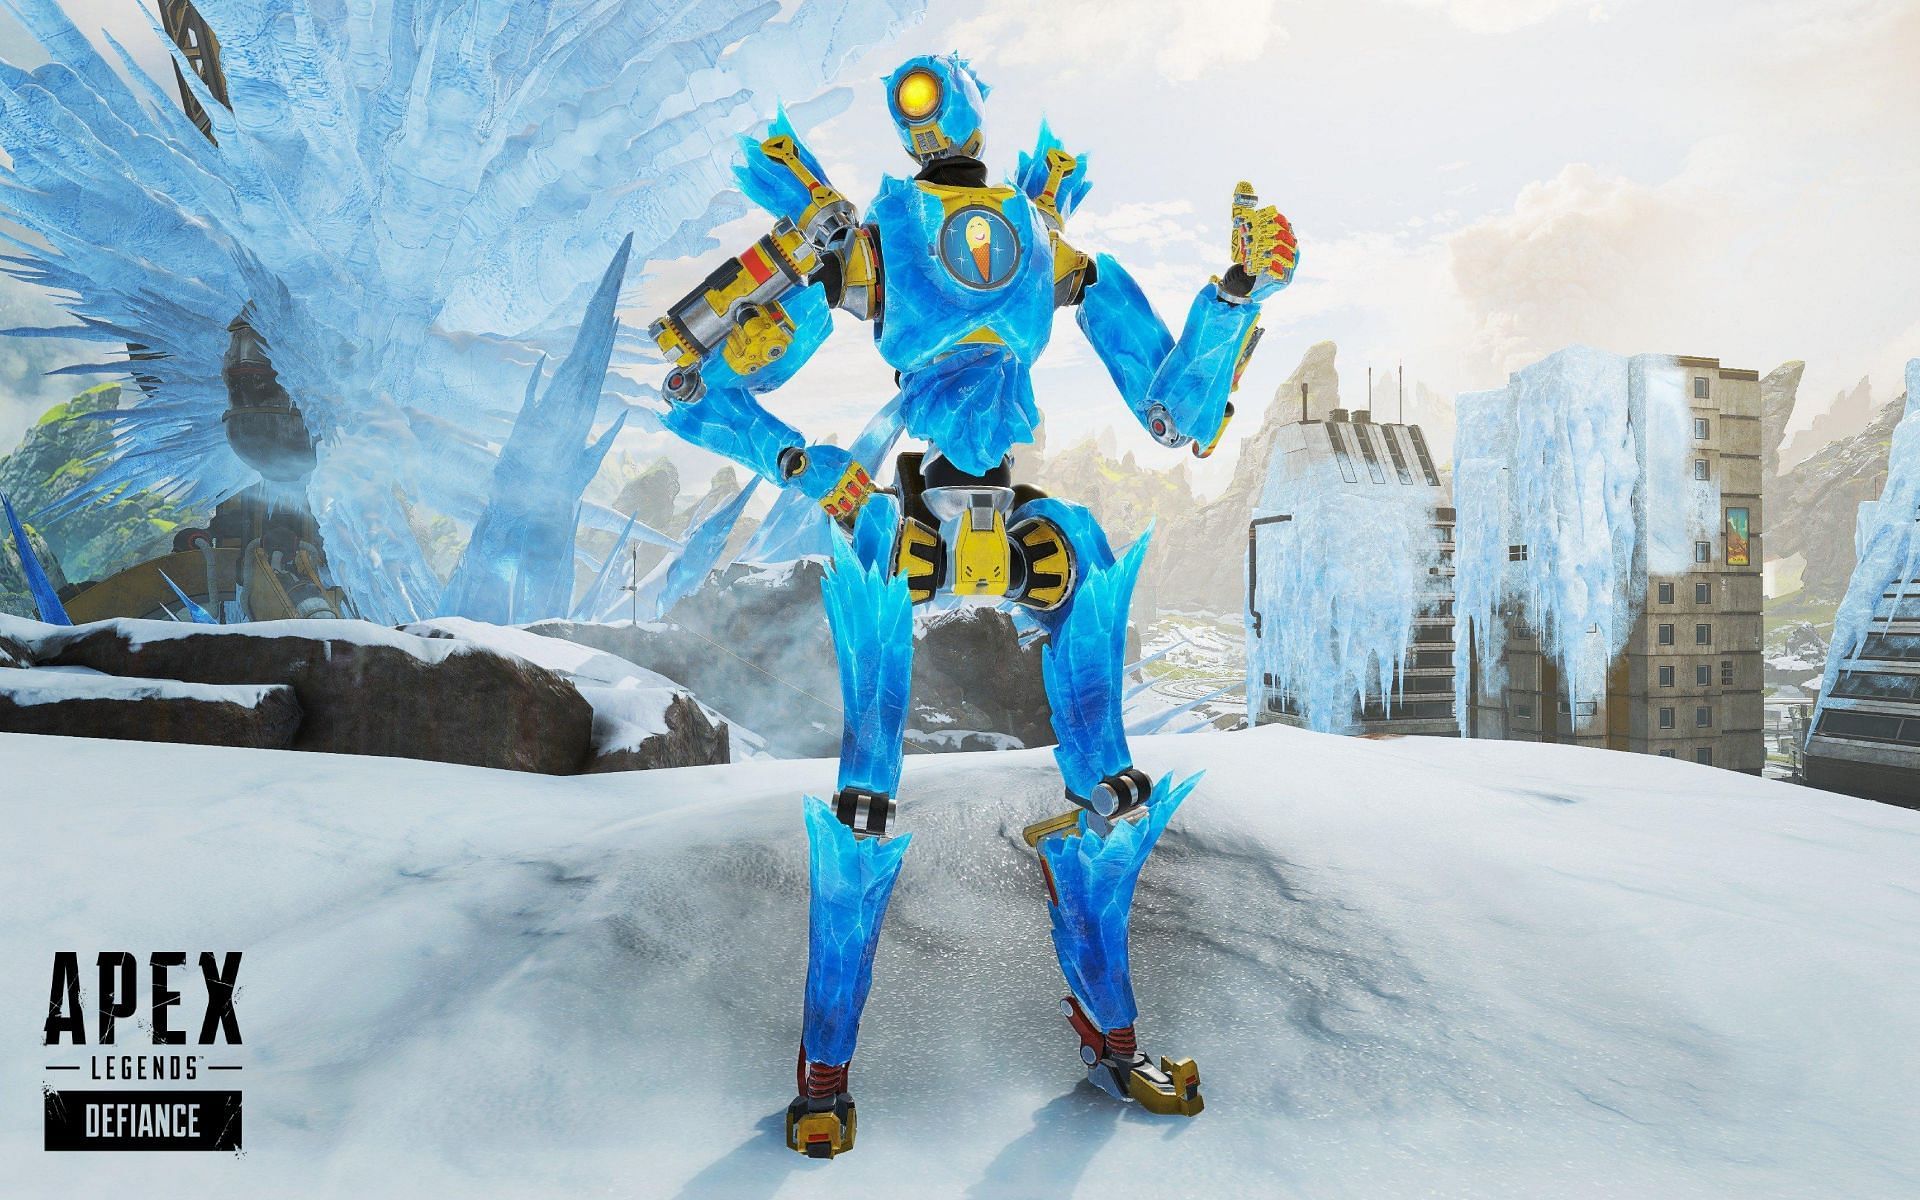 Pathfinder's Iced Out skin in Apex Legends (Image via Respawn Entertai...